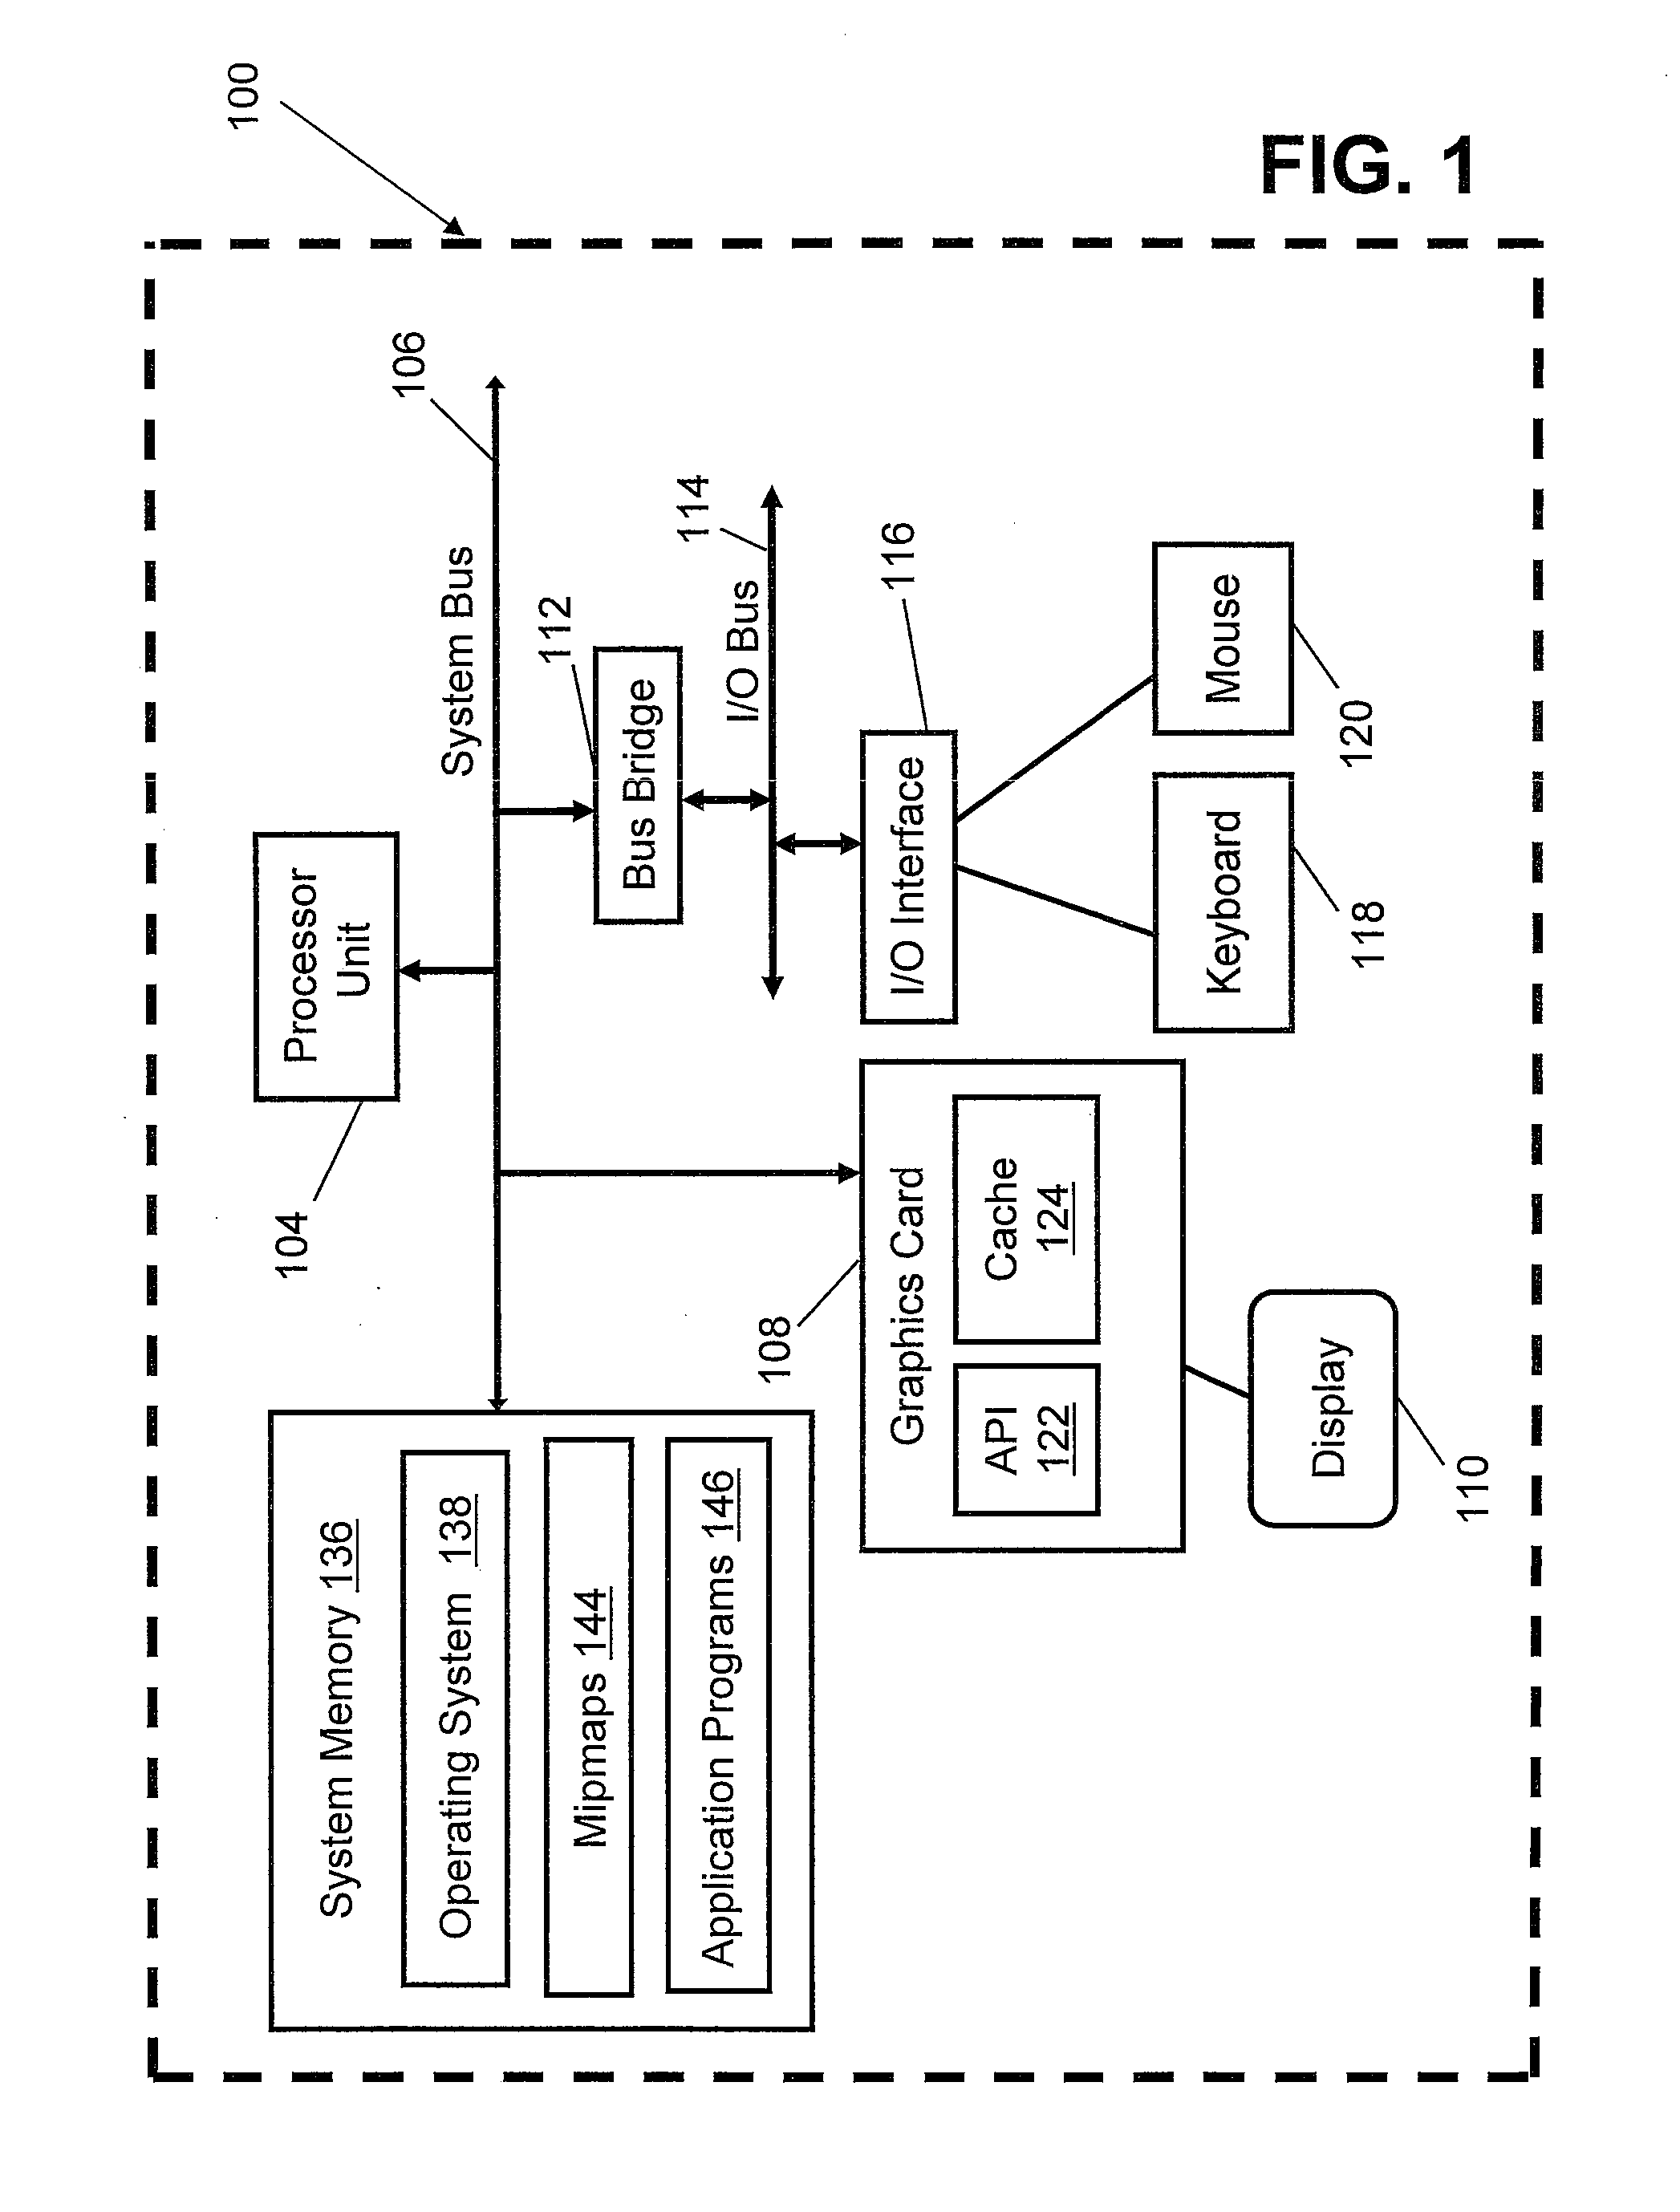 Method and Apparatus for Improving Hit Rates of a Cache Memory for Storing Texture Data During Graphics Rendering